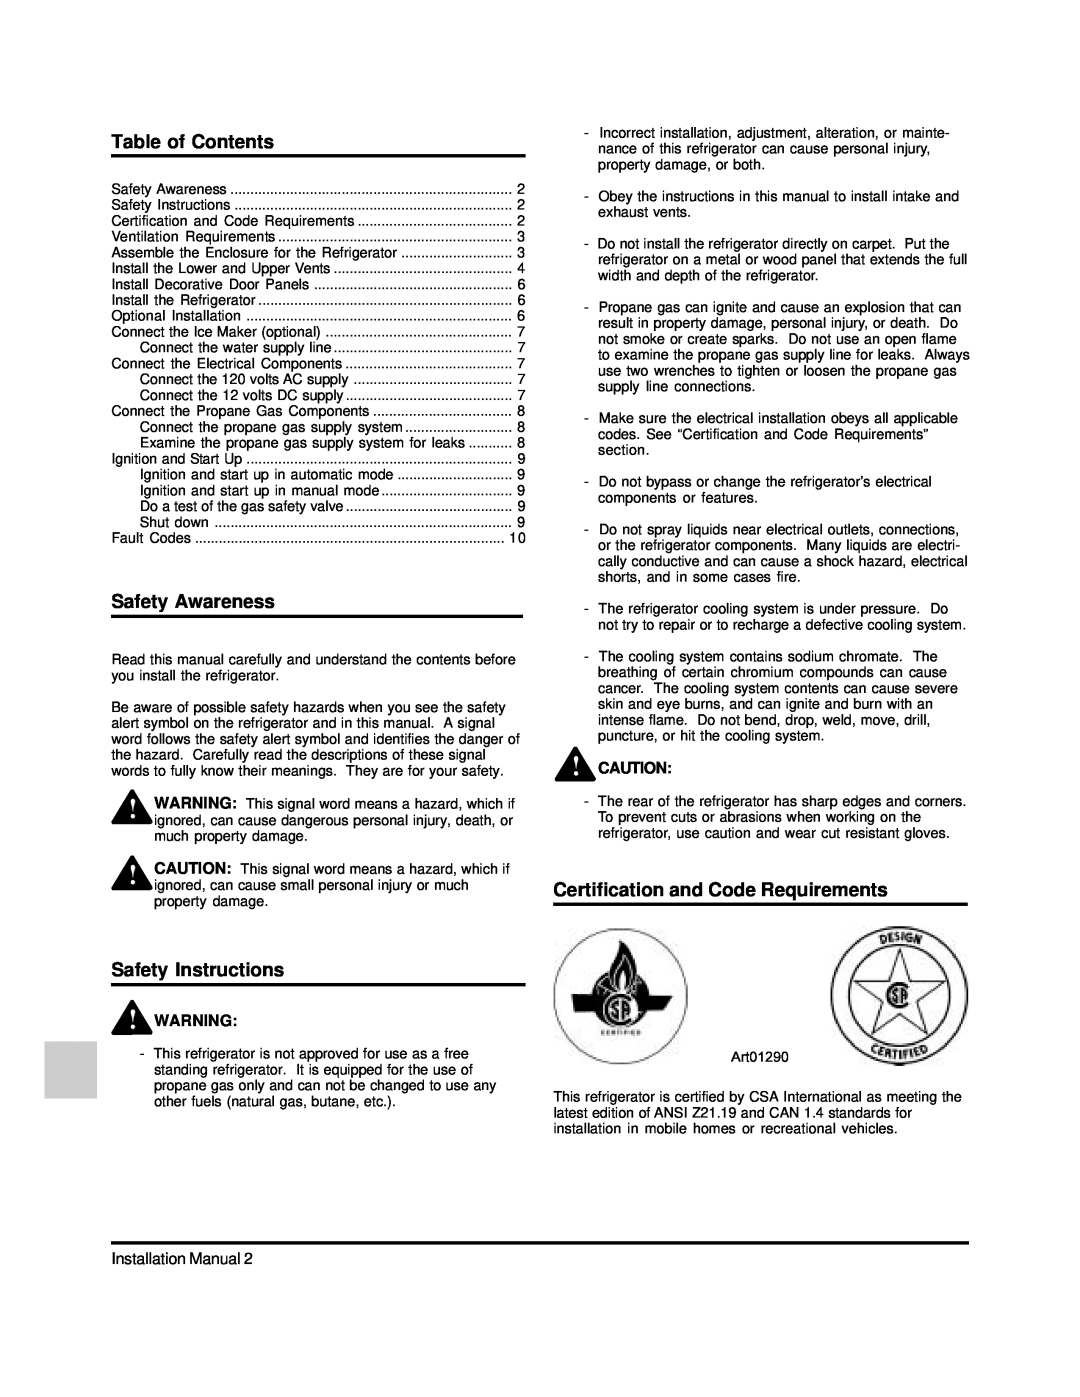 Norcold 120x Table of Contents, Safety Awareness, Safety Instructions, Certification and Code Requirements 